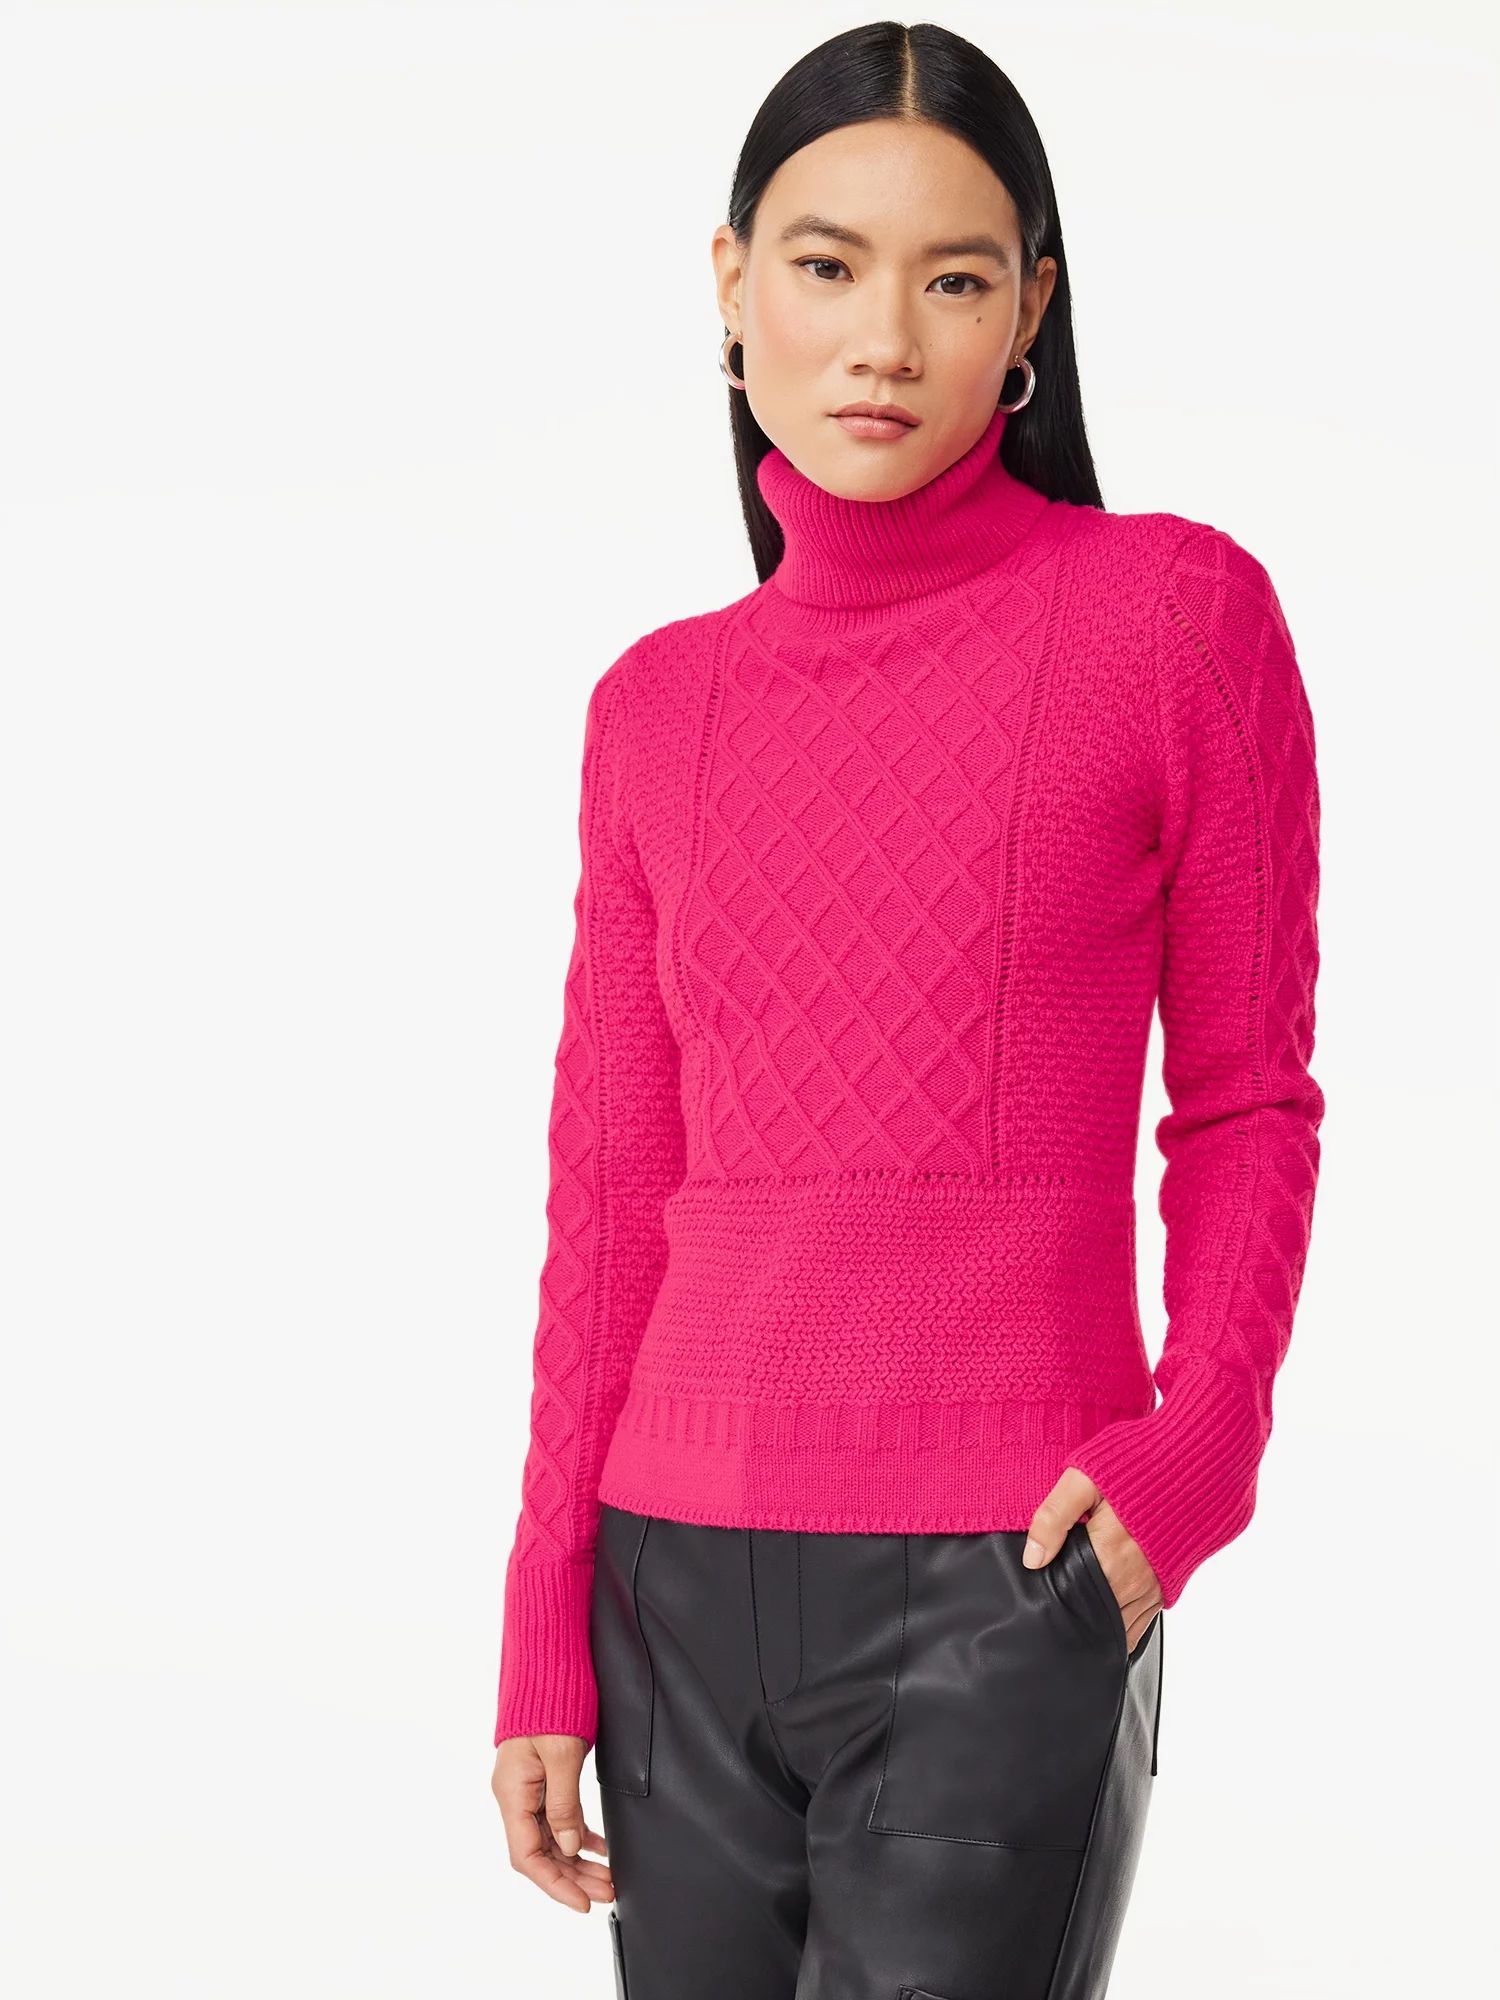 Scoop Women's Cable Knit Pullover Sweater with Long Sleeves, Sizes XS-XXL | Walmart (US)